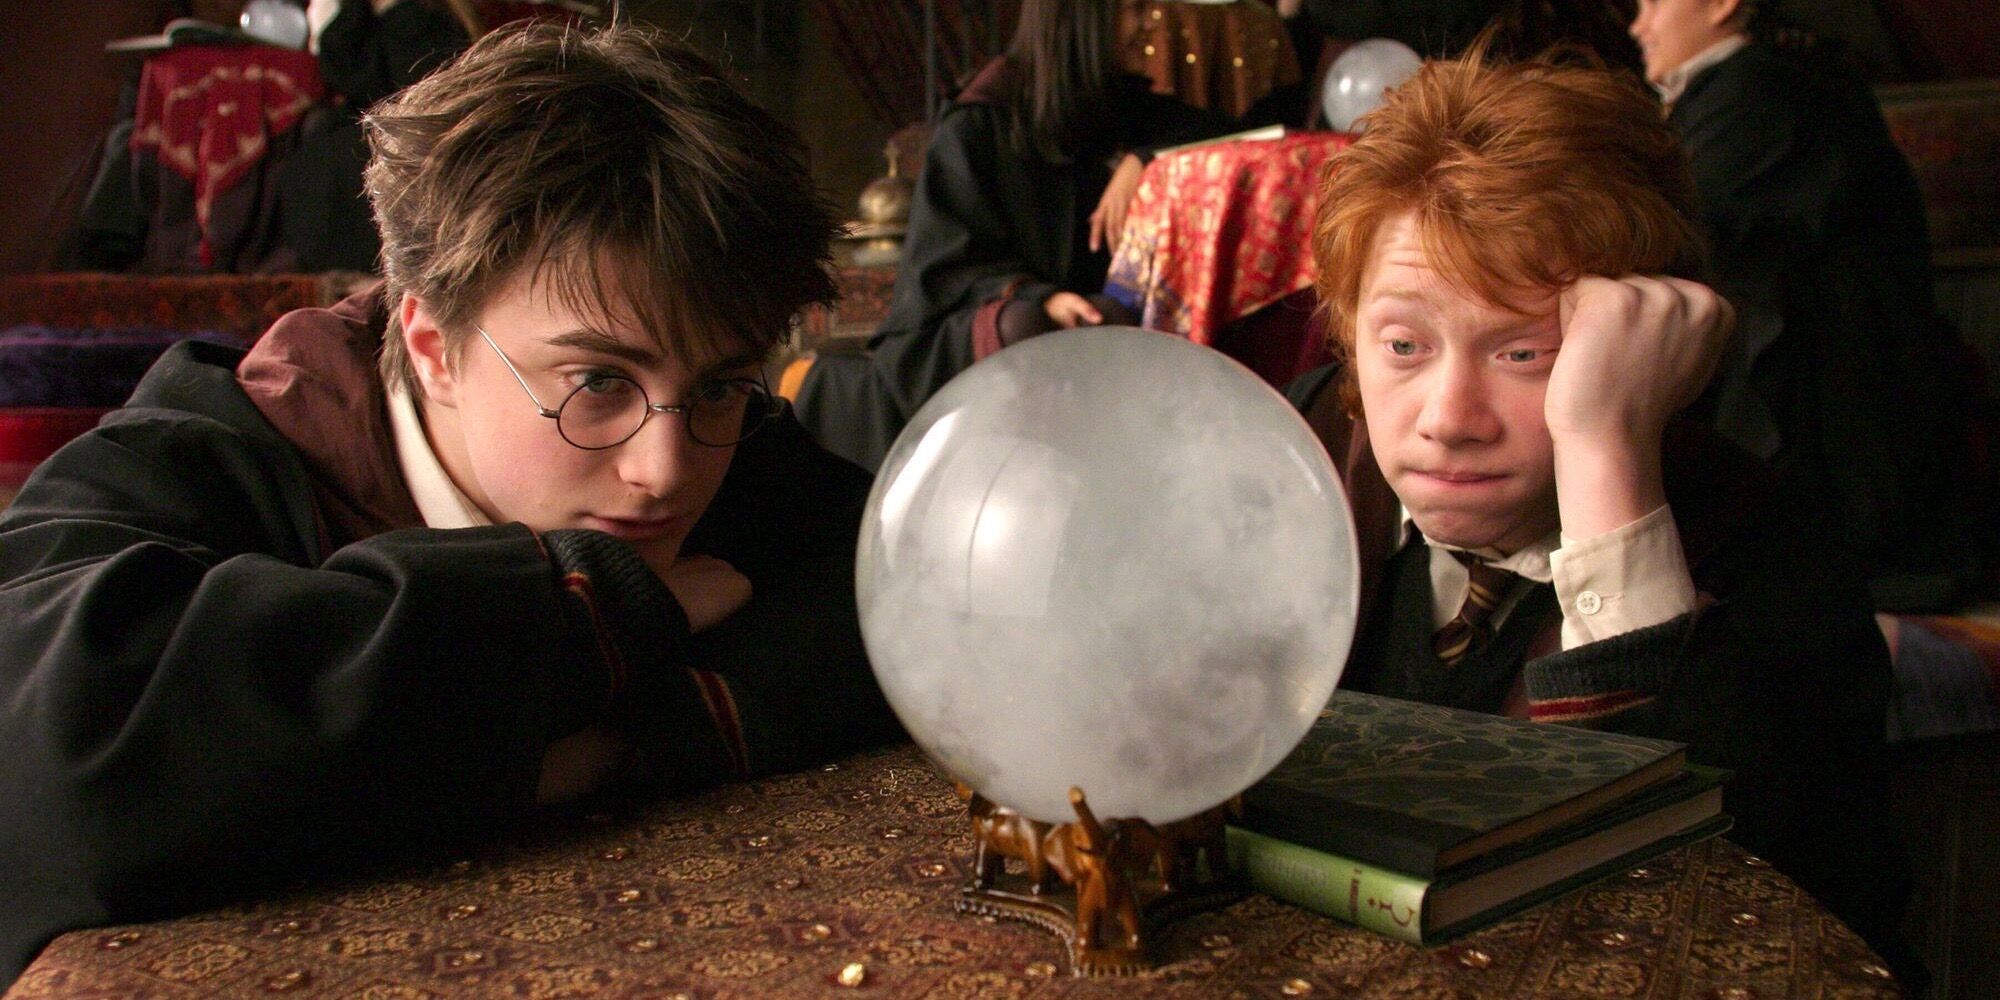 Harry Potter: 10 Things About Ron Weasley That Were Changed For